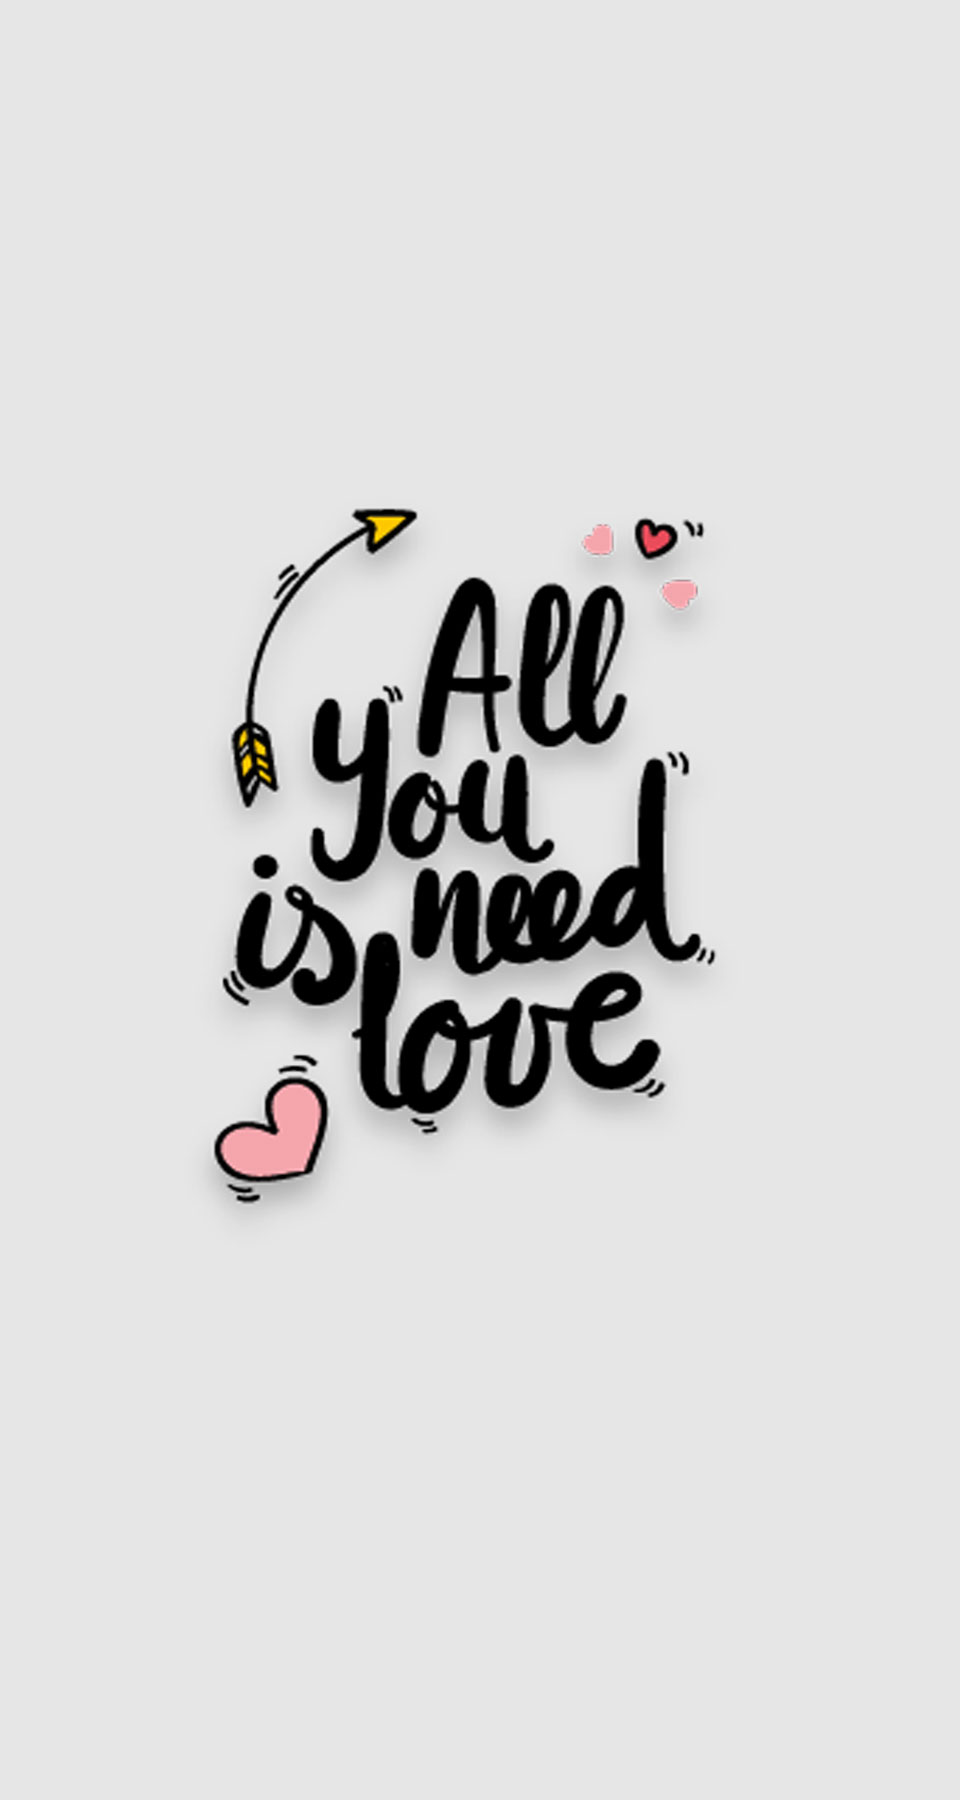 Best Ps i love you iPhone HD Wallpapers  iLikeWallpaper